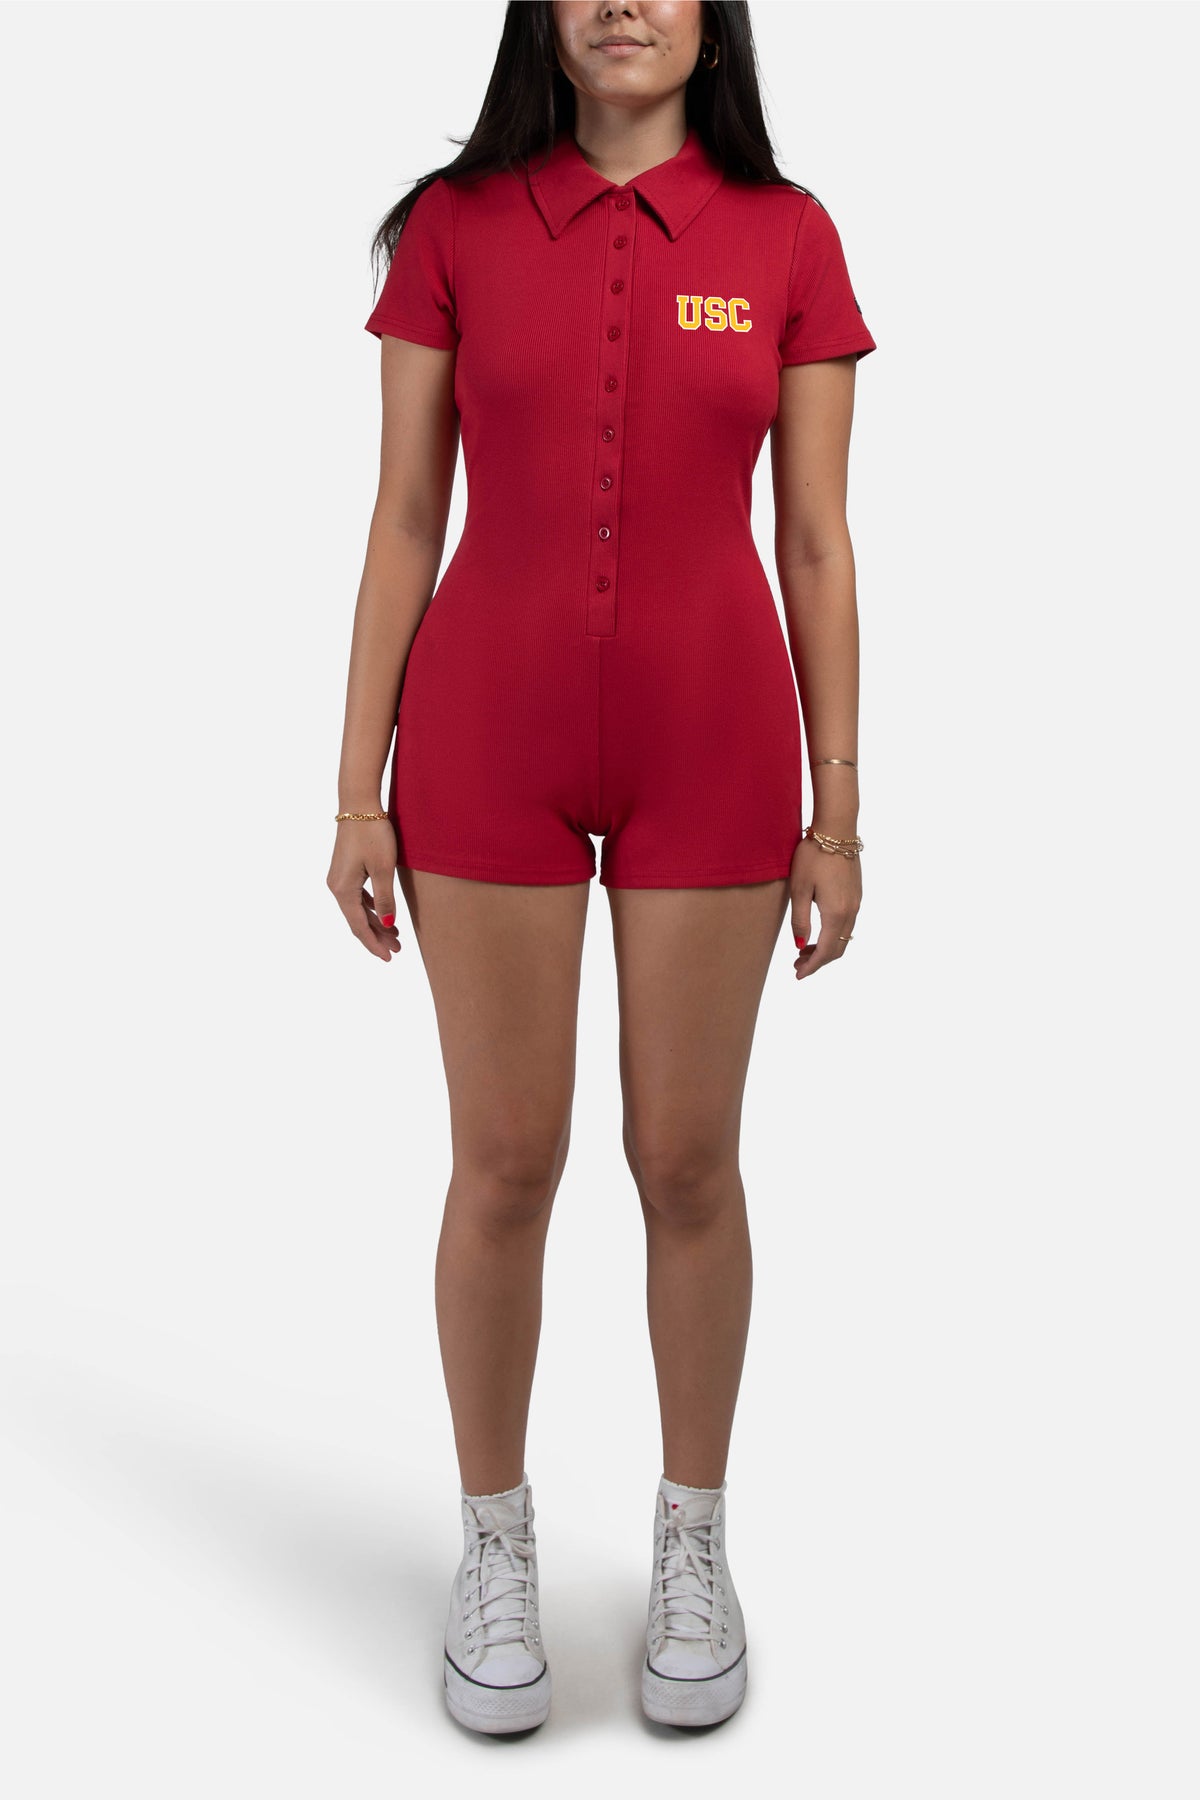 University of Southern California Gameday Romper